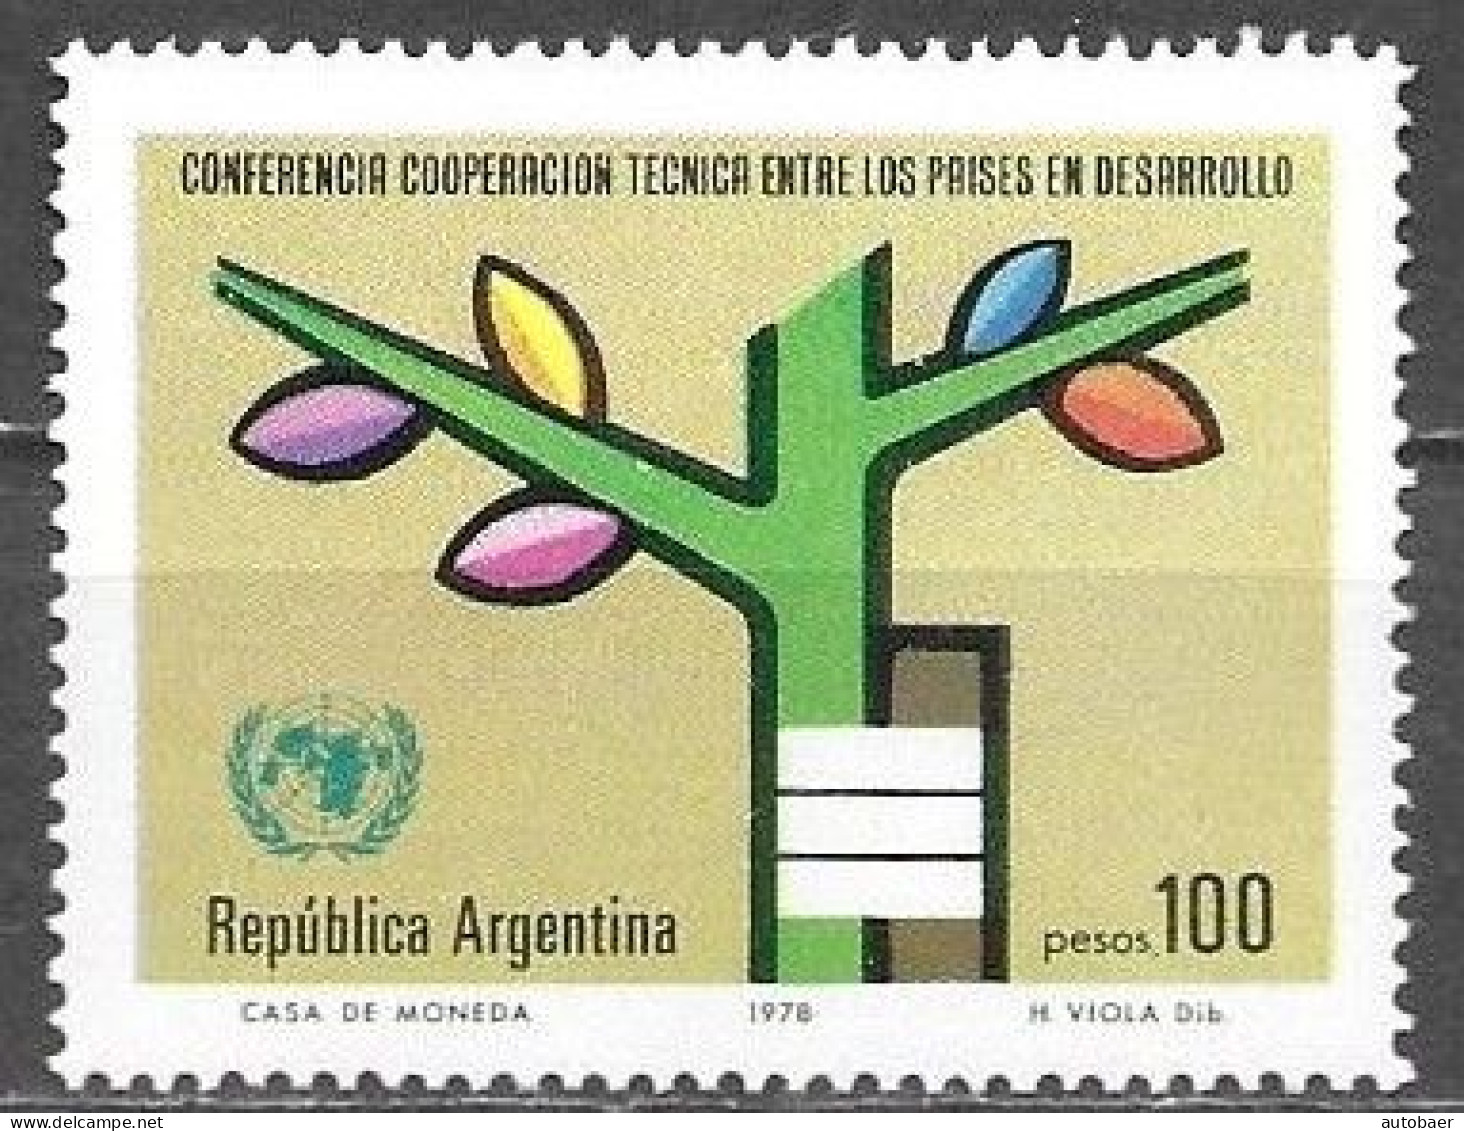 Argentina 1978 Conferencia Cooperacion Conference Cooperation Developing Countries Mi. 1353 MNH Postfrisch Neuf ** - Nuovi